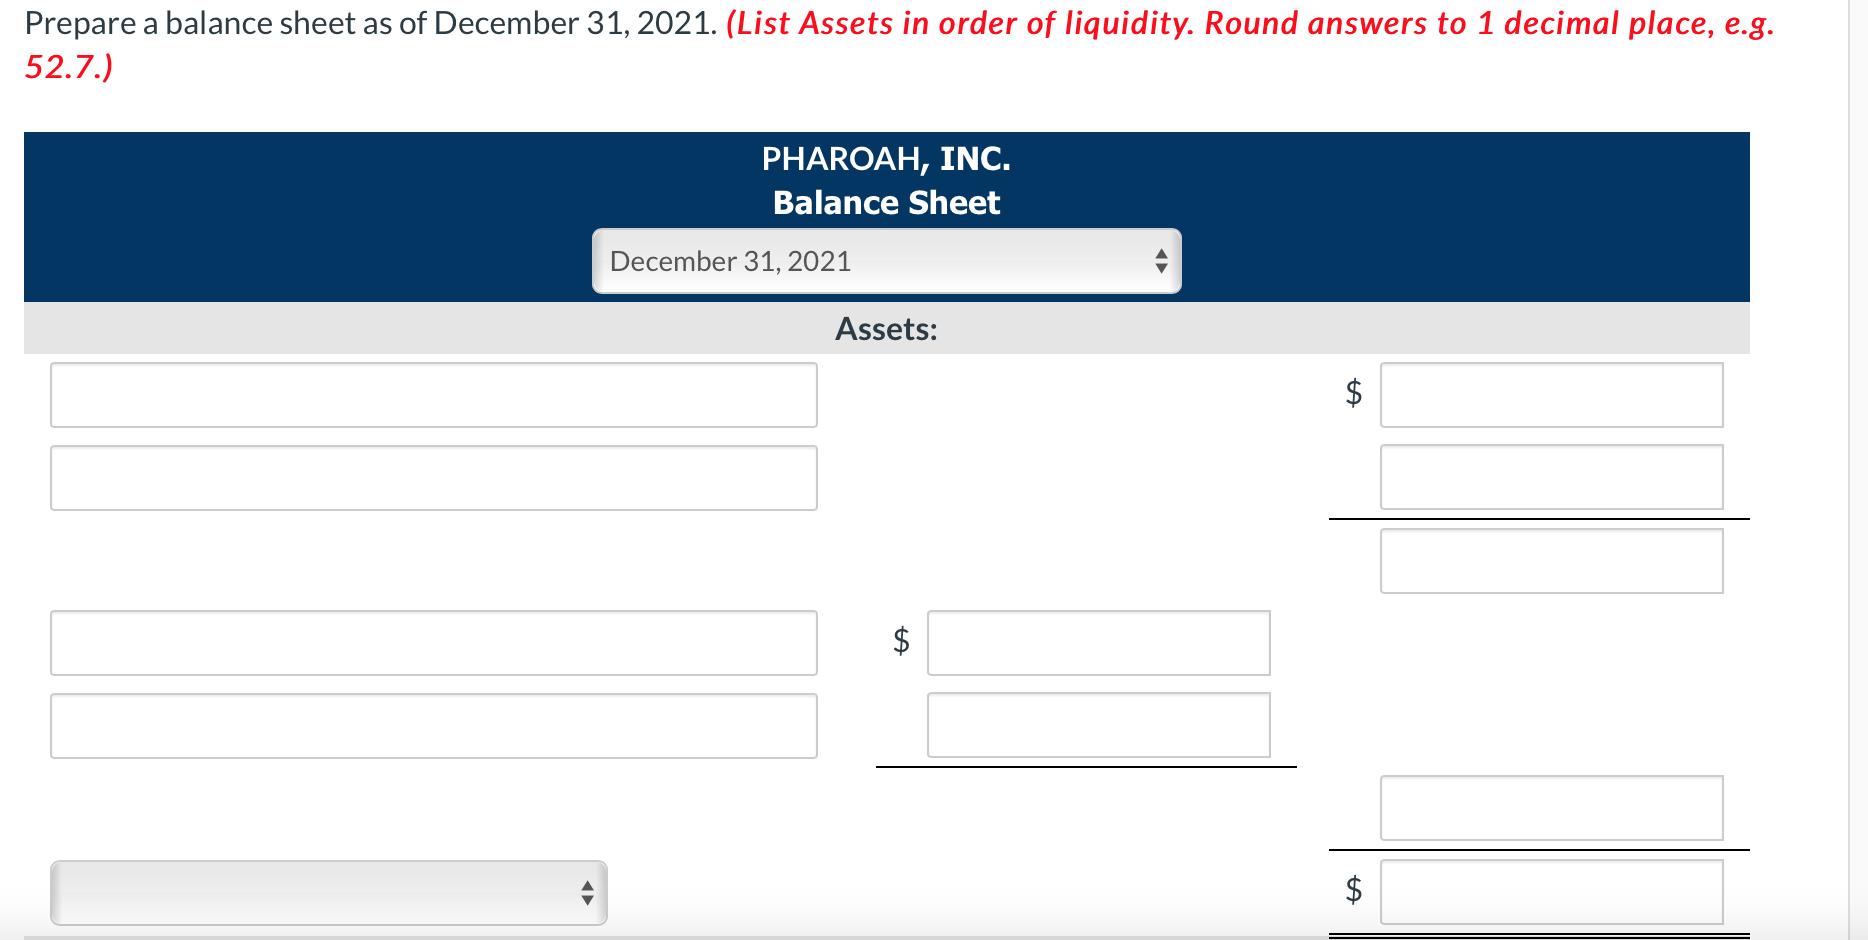 Prepare a balance sheet as of December 31, 2021. (List Assets in order of liquidity. Round answers to 1 decimal place, e.g. 5